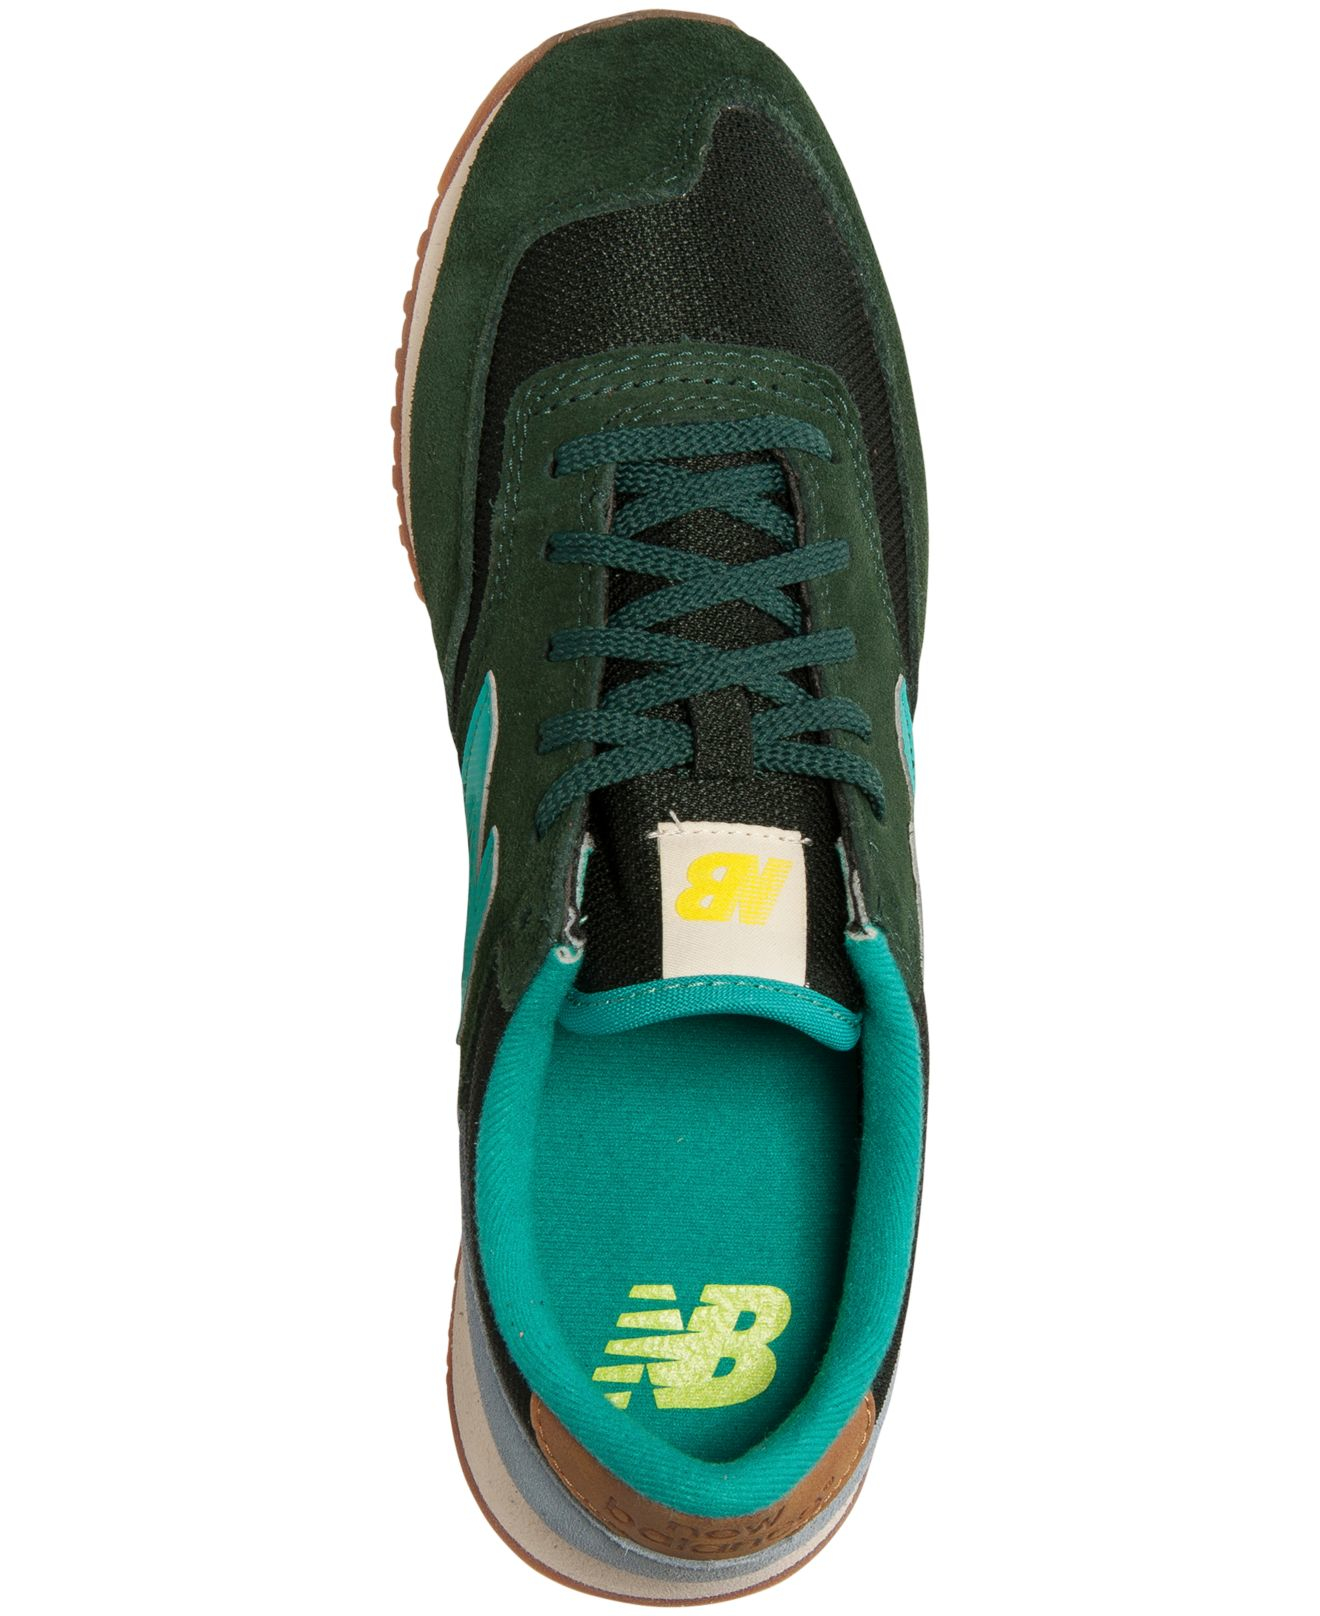 New Balance Suede Women's 620 Redwoods Casual Sneakers From Finish Line in  Green/Grey (Green) - Lyst